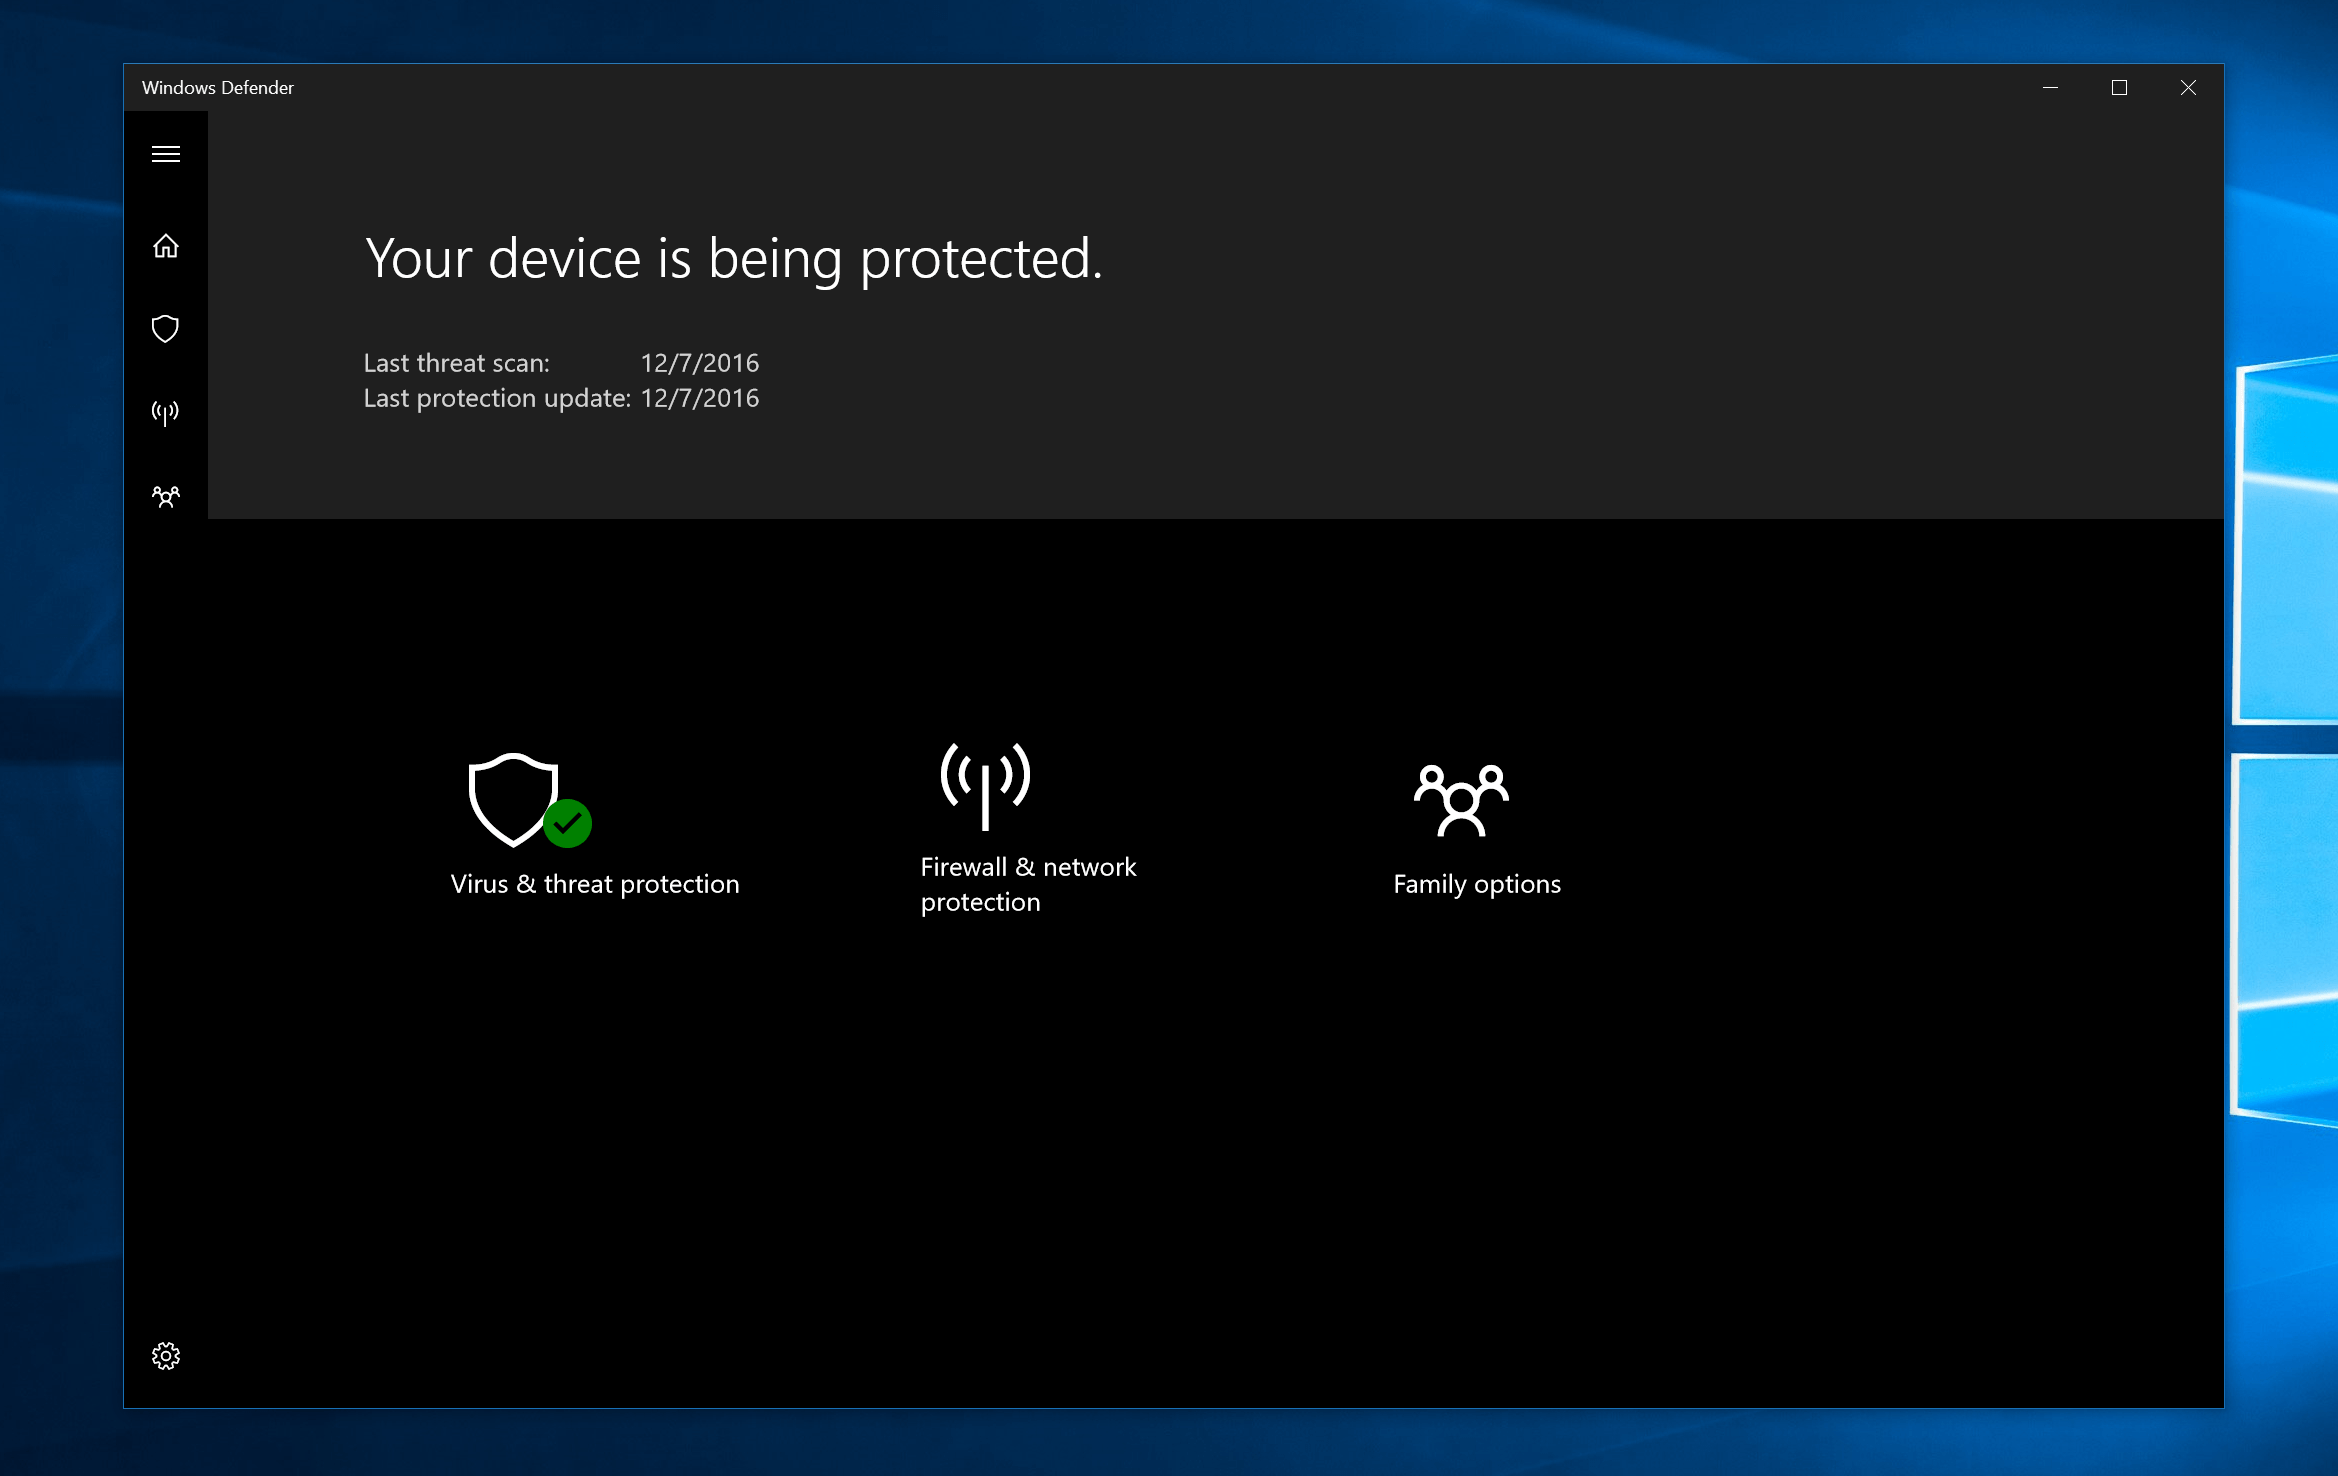 This is the new Windows Defender app coming with Windows 10’s Creators Update